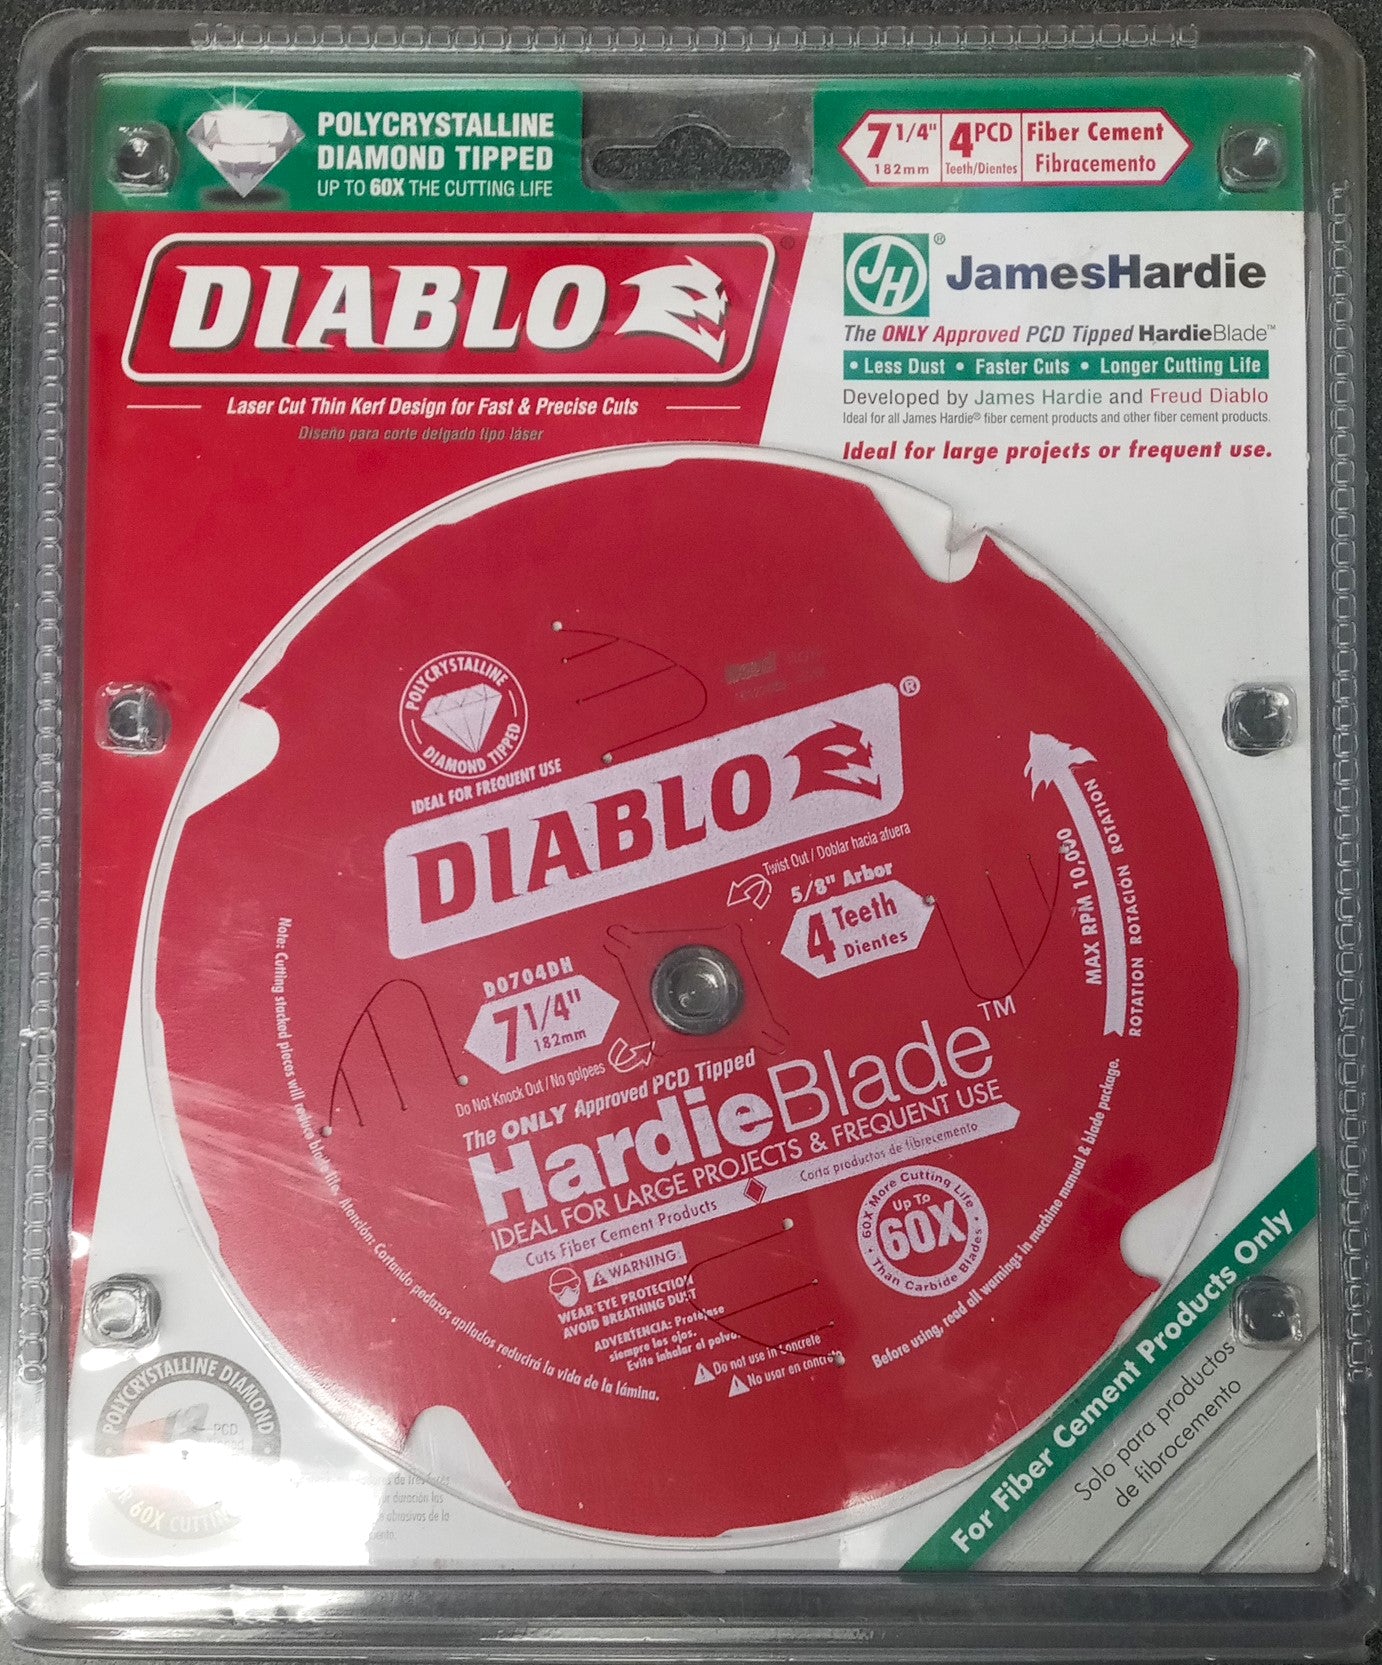 Diablo D0704DH 7‑1/4" x 4 Tooth, HardieBlade for Fiber Cement Saw Blade Italy